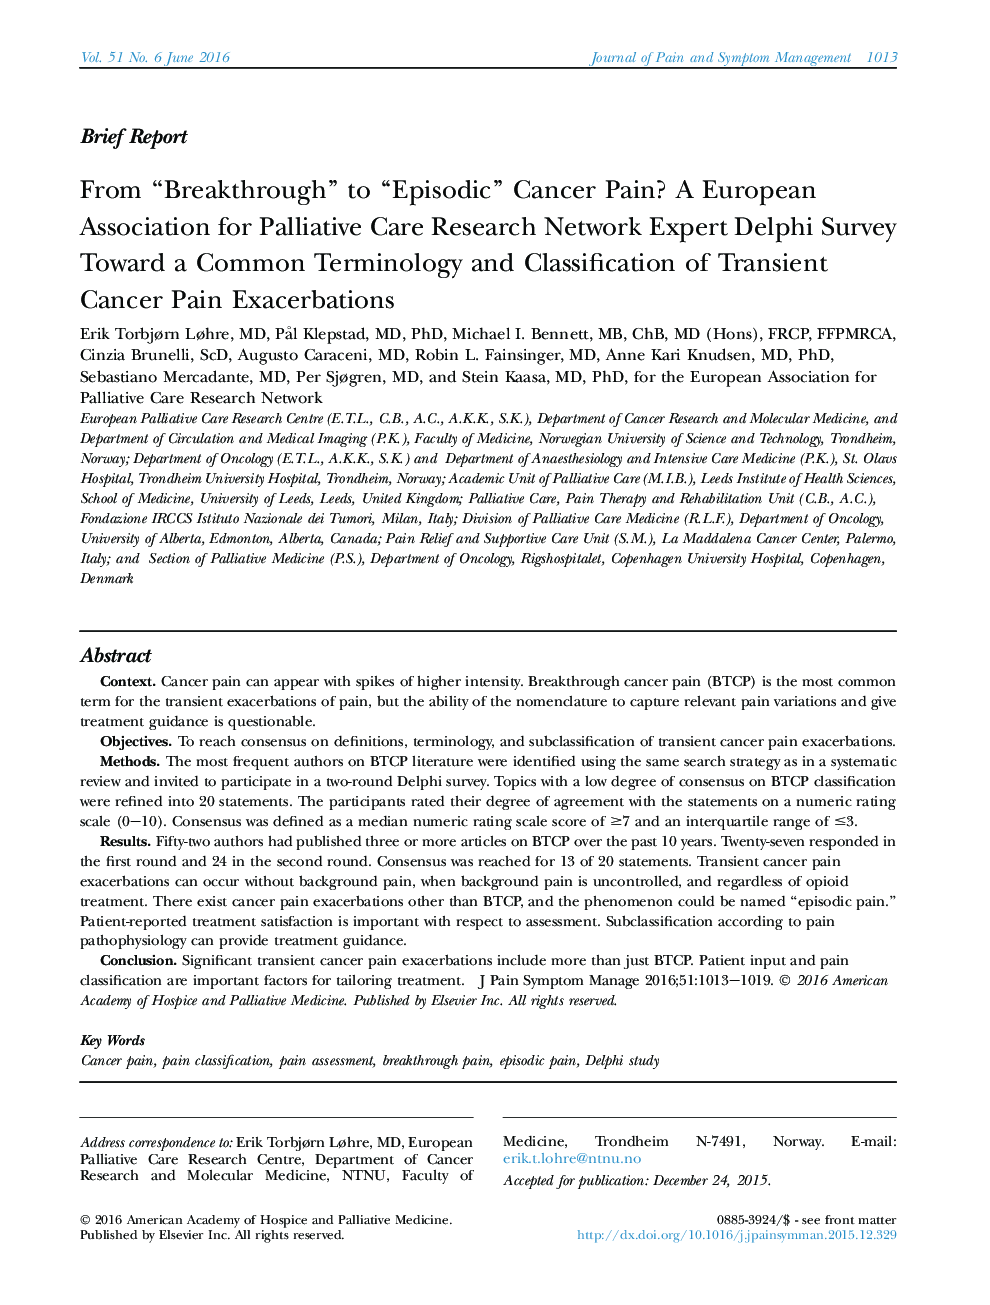 Brief ReportFrom “Breakthrough” to “Episodic” Cancer Pain? A European Association for Palliative Care Research Network Expert Delphi Survey Toward a Common Terminology and Classification of Transient Cancer Pain Exacerbations